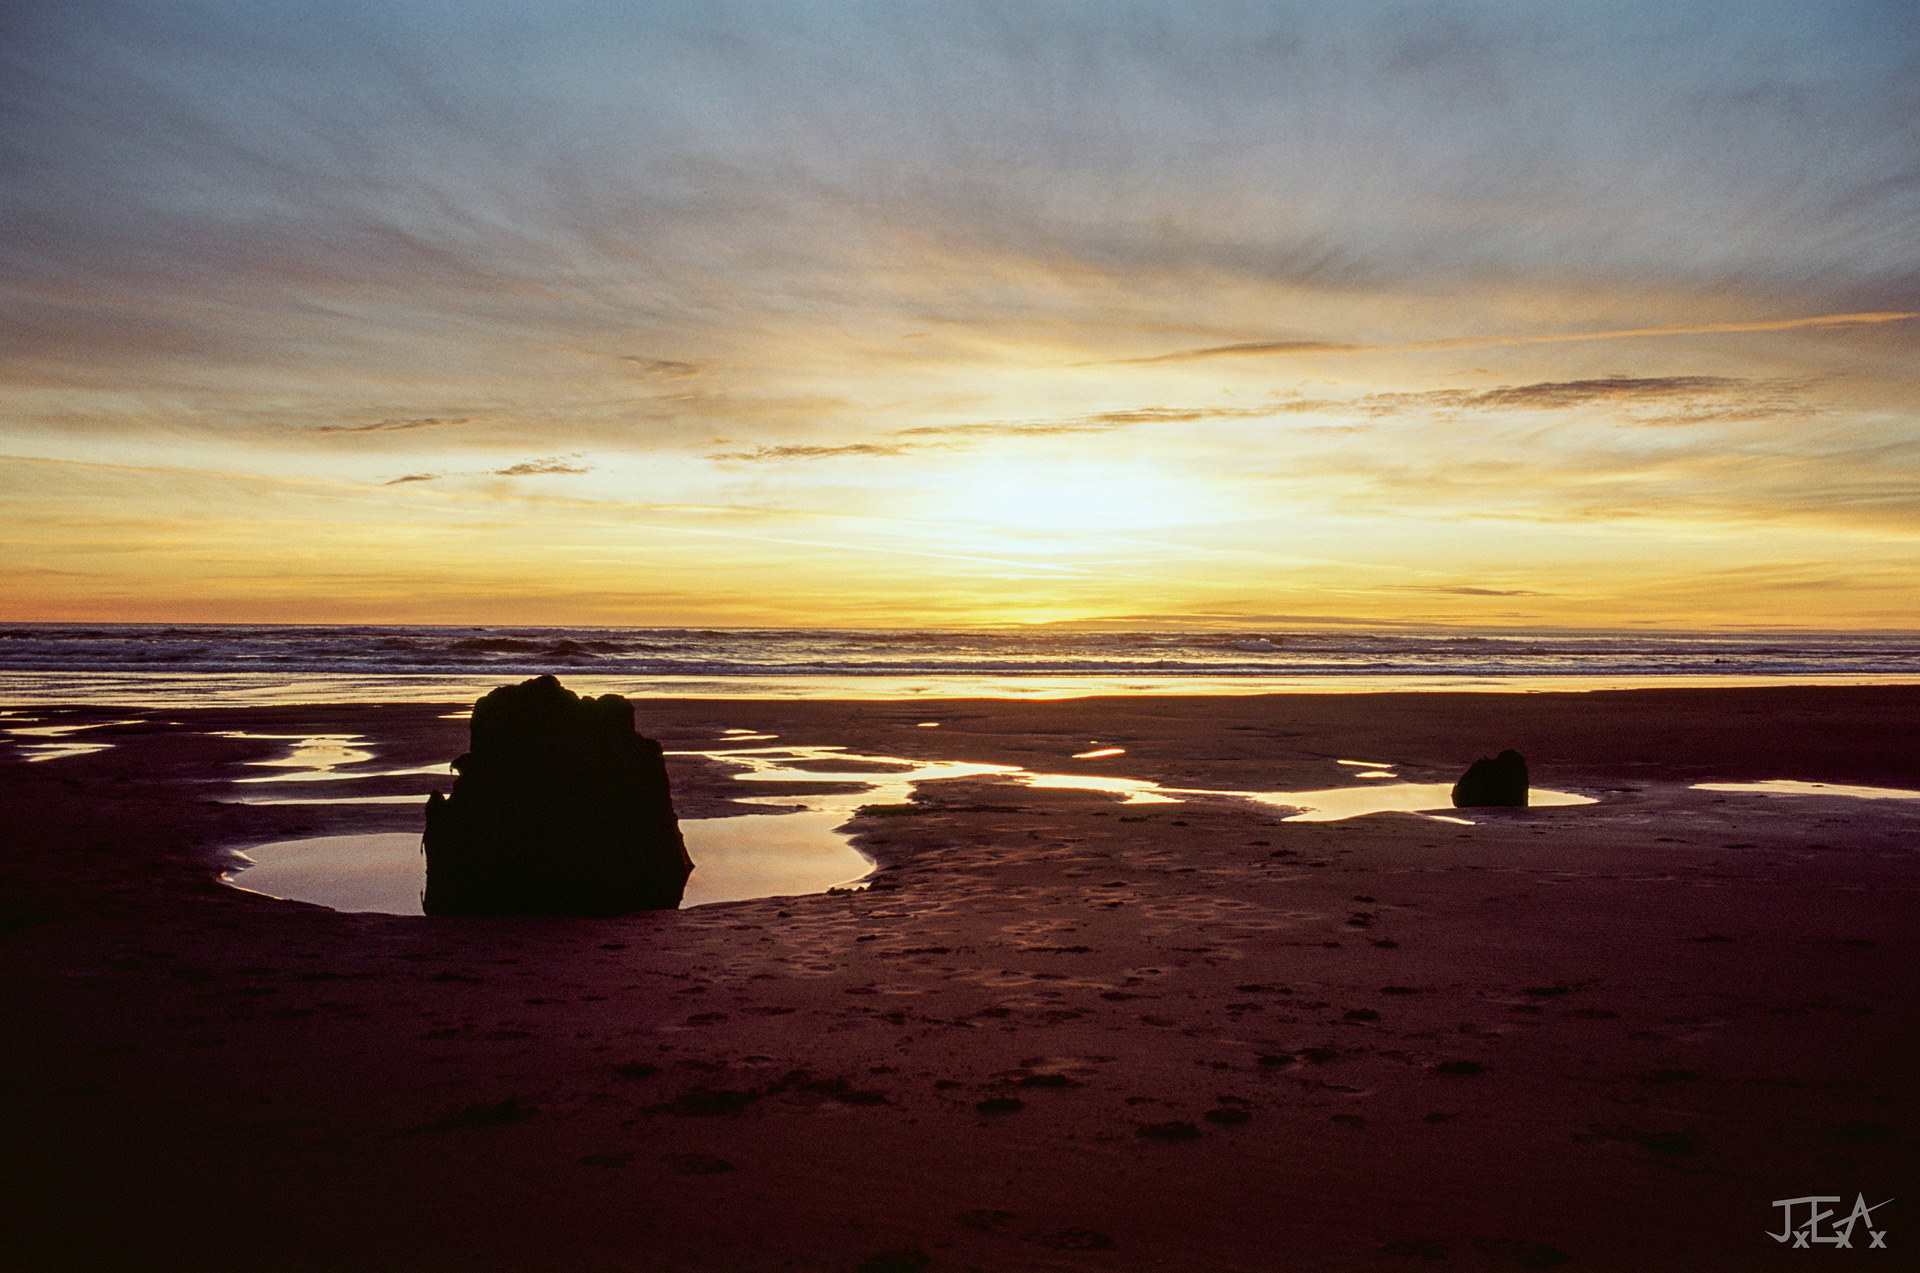 A landscape image of an ancient stump on Neskowin Beach at sunset.